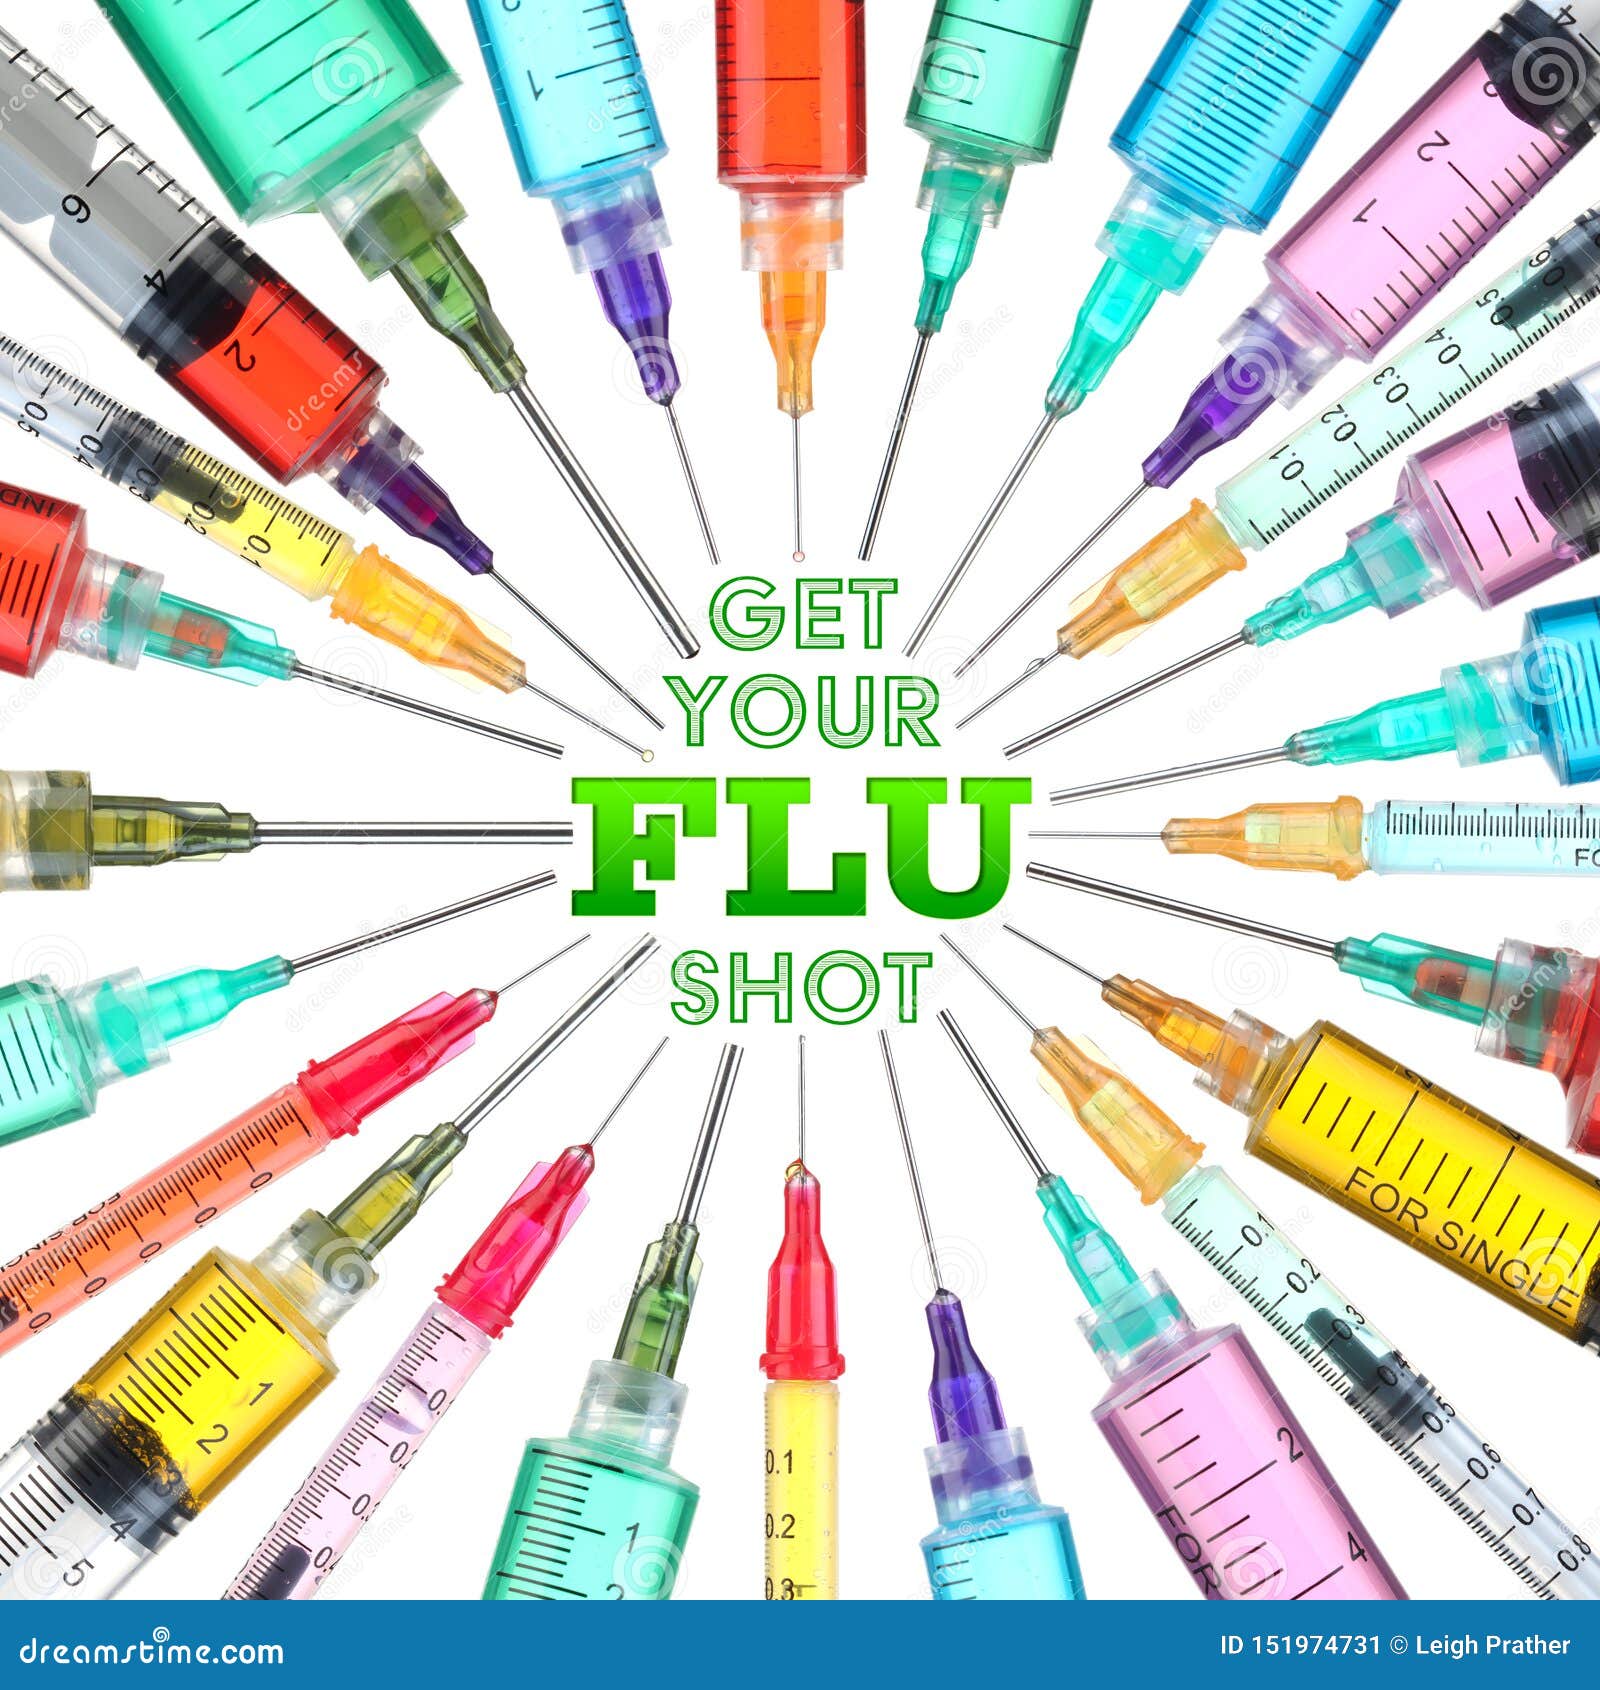 bright and colorful syringes - get your flu shot